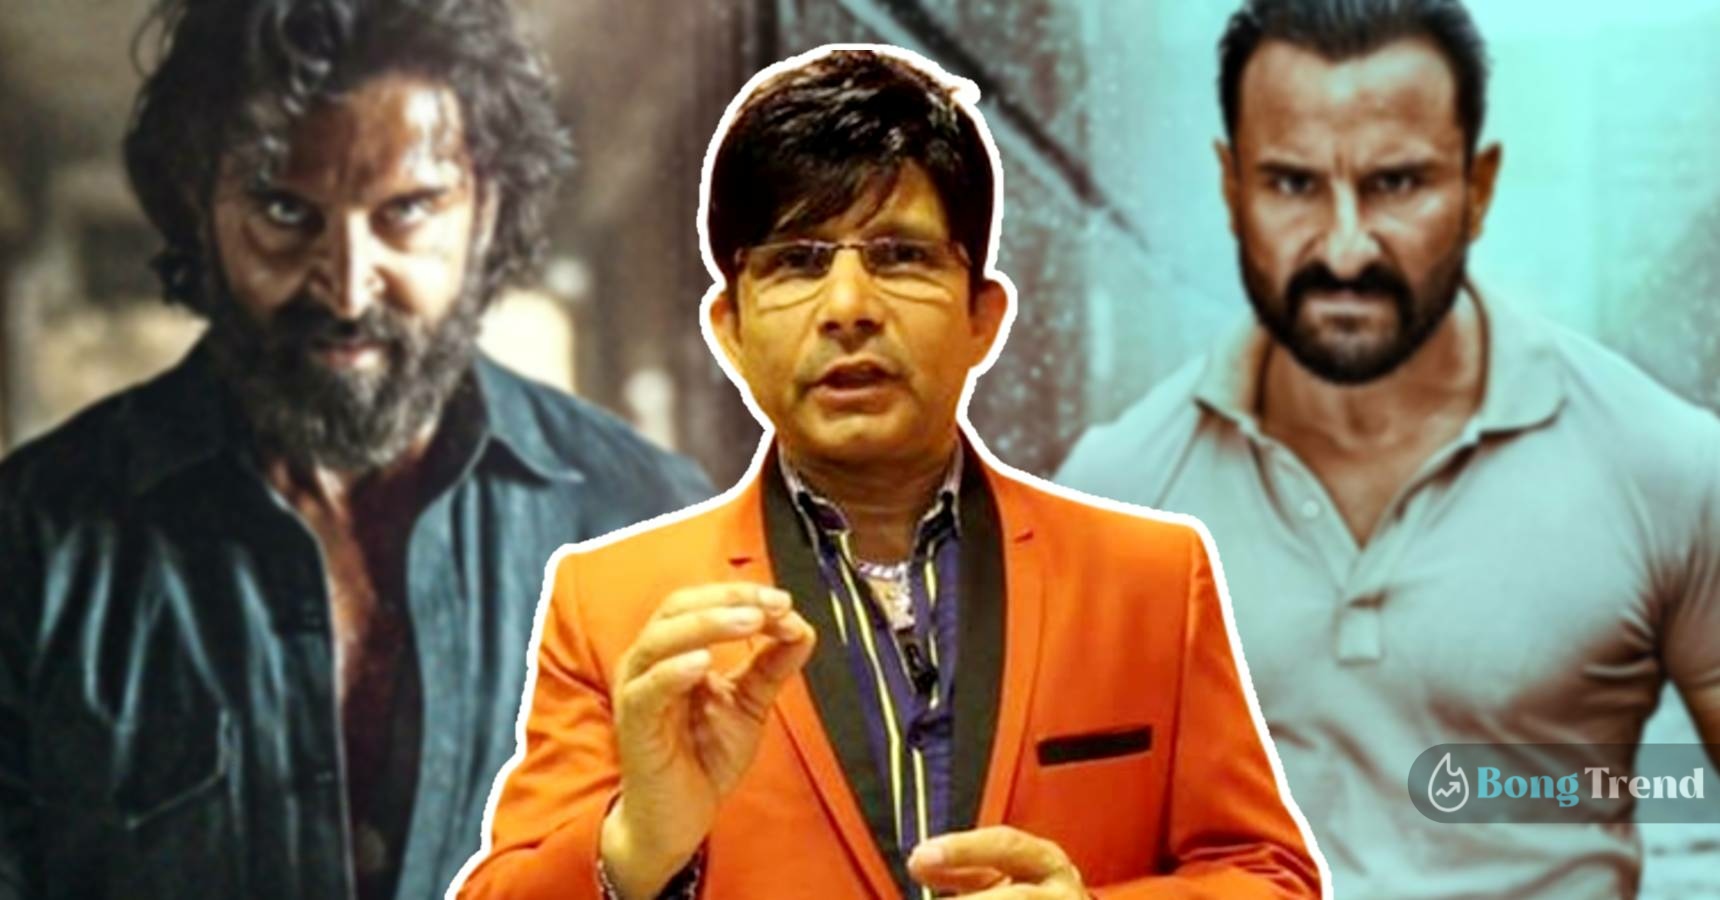 KRK says he will definitely review Vikram Vedha if Bollywood people don’t put him on jail again